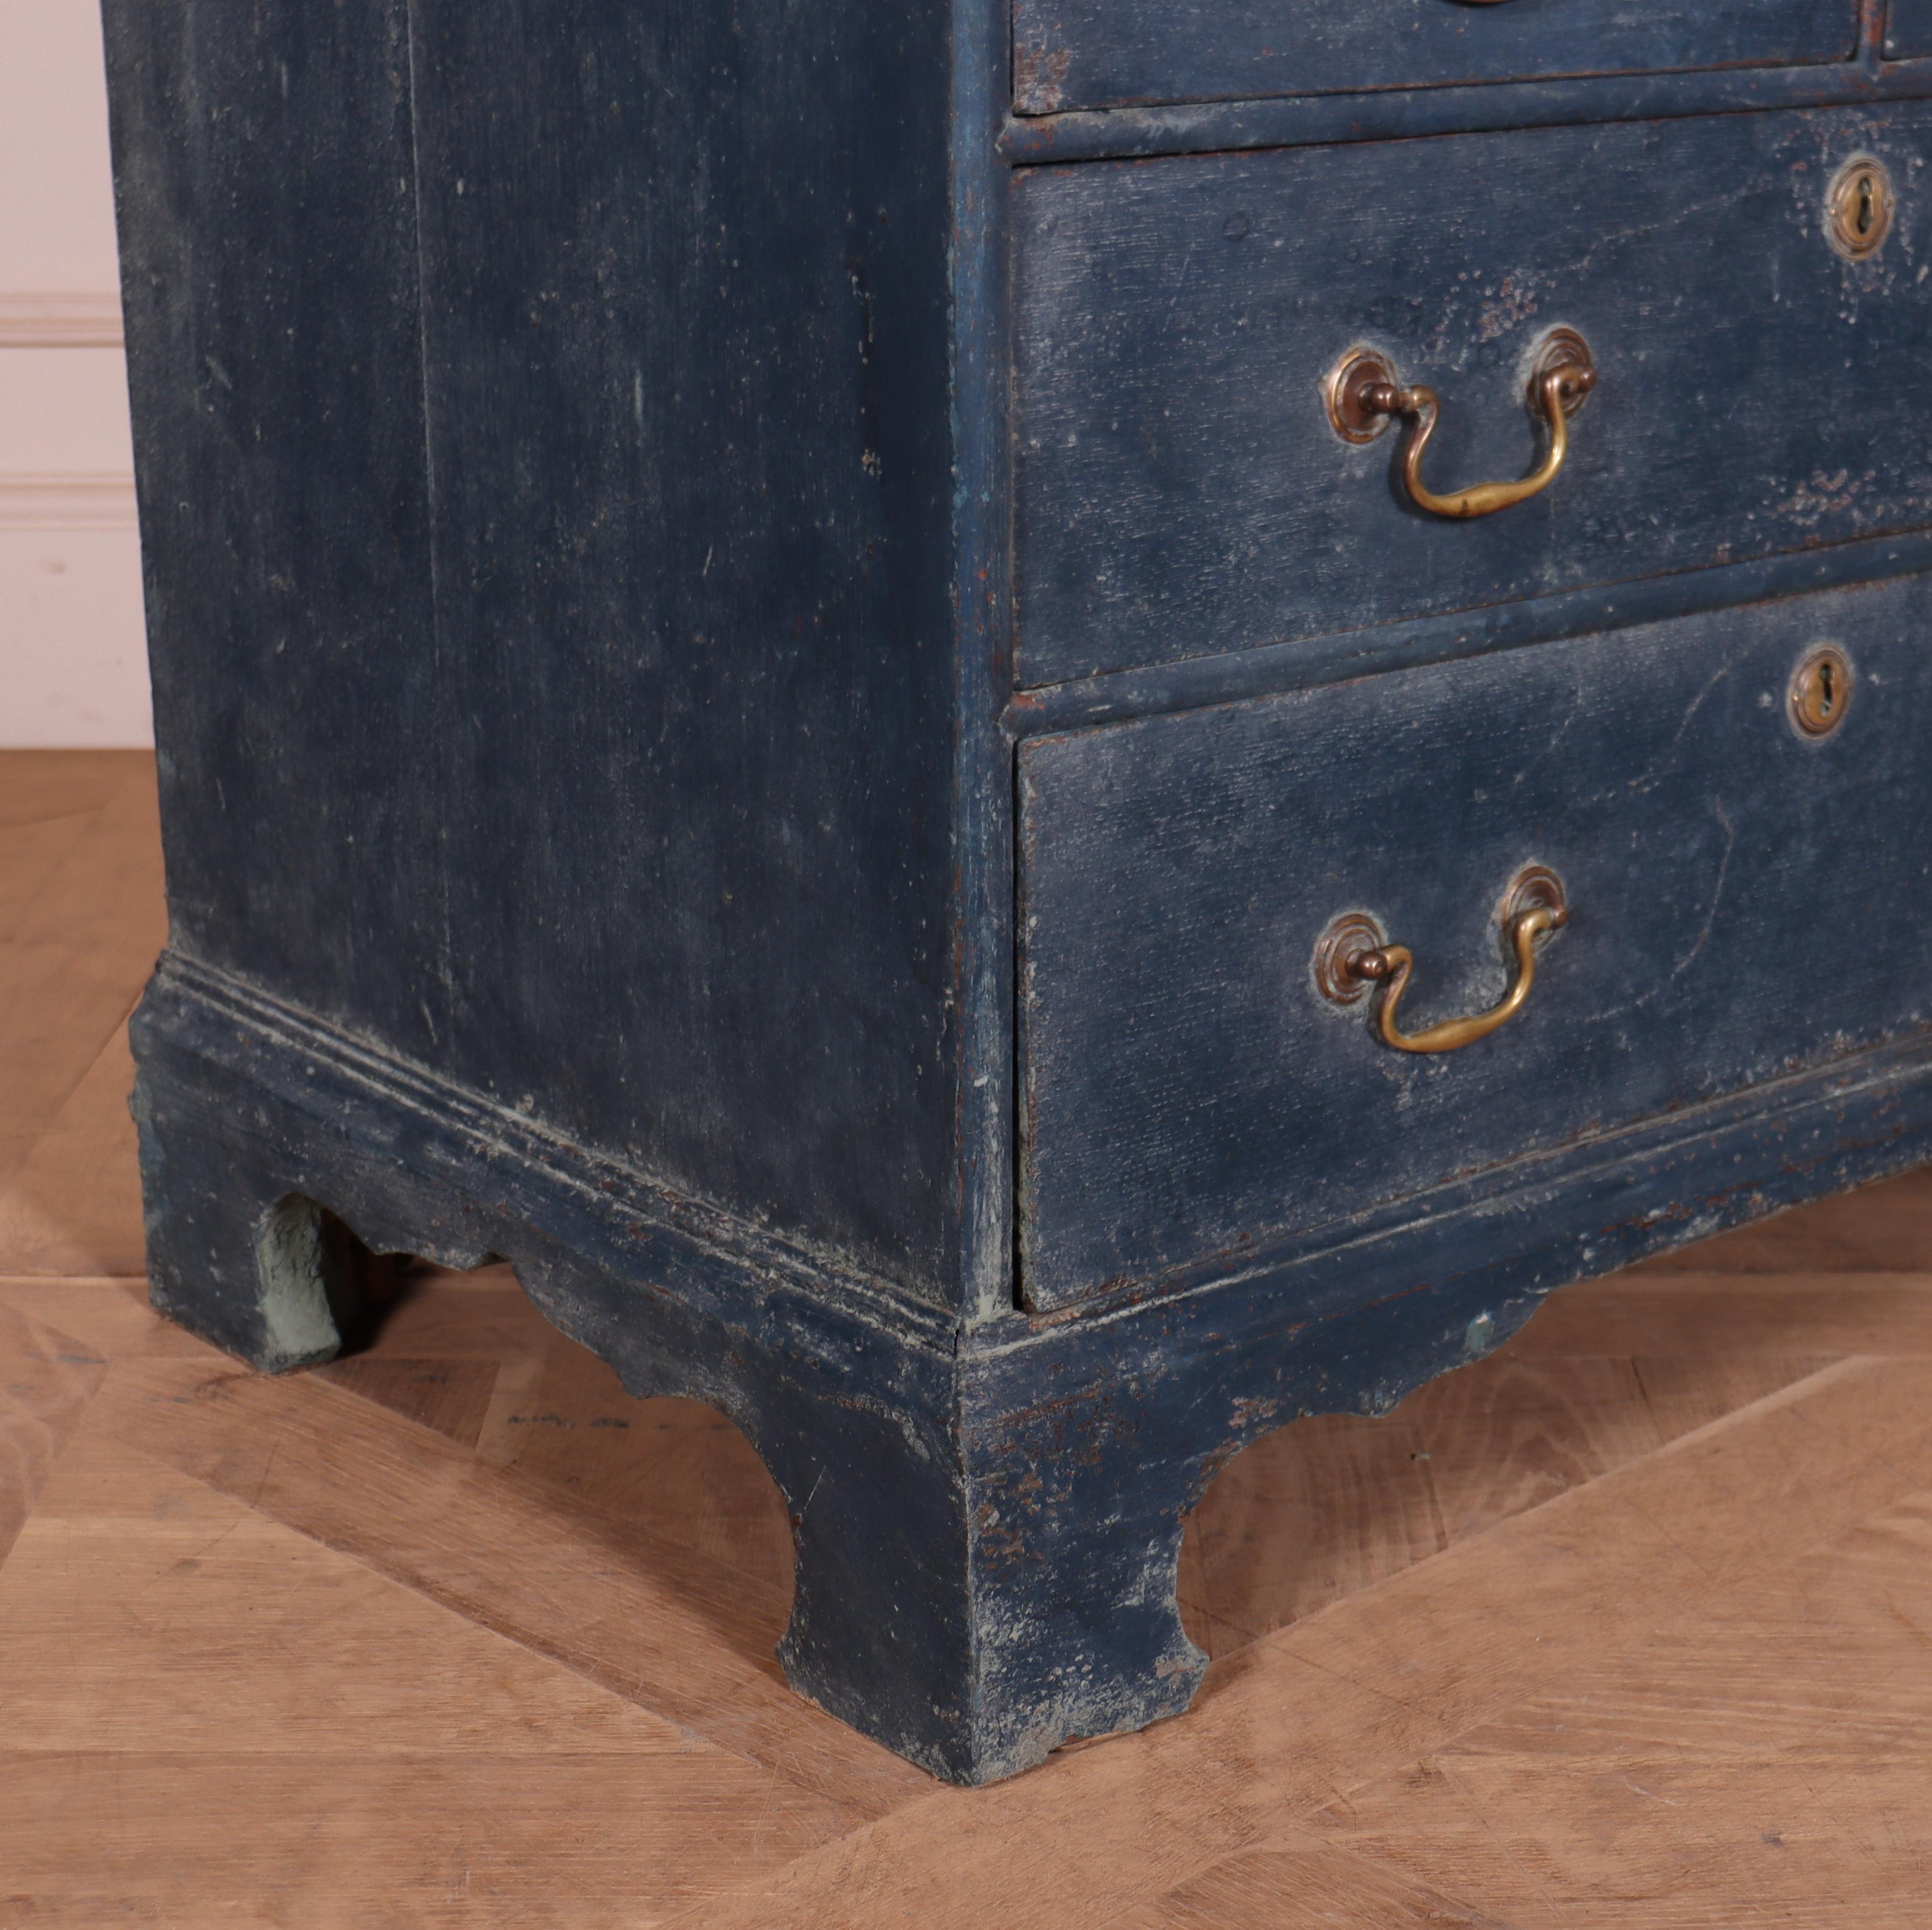 Small 18th century English painted oak bureau with a fitted interior including a well and a secret compartment. 1780.

The height to the underside of the desk is 70cm.

Dimensions
31.5 inches (80 cm) Wide
21 inches (53 cm) Deep
38 inches (97